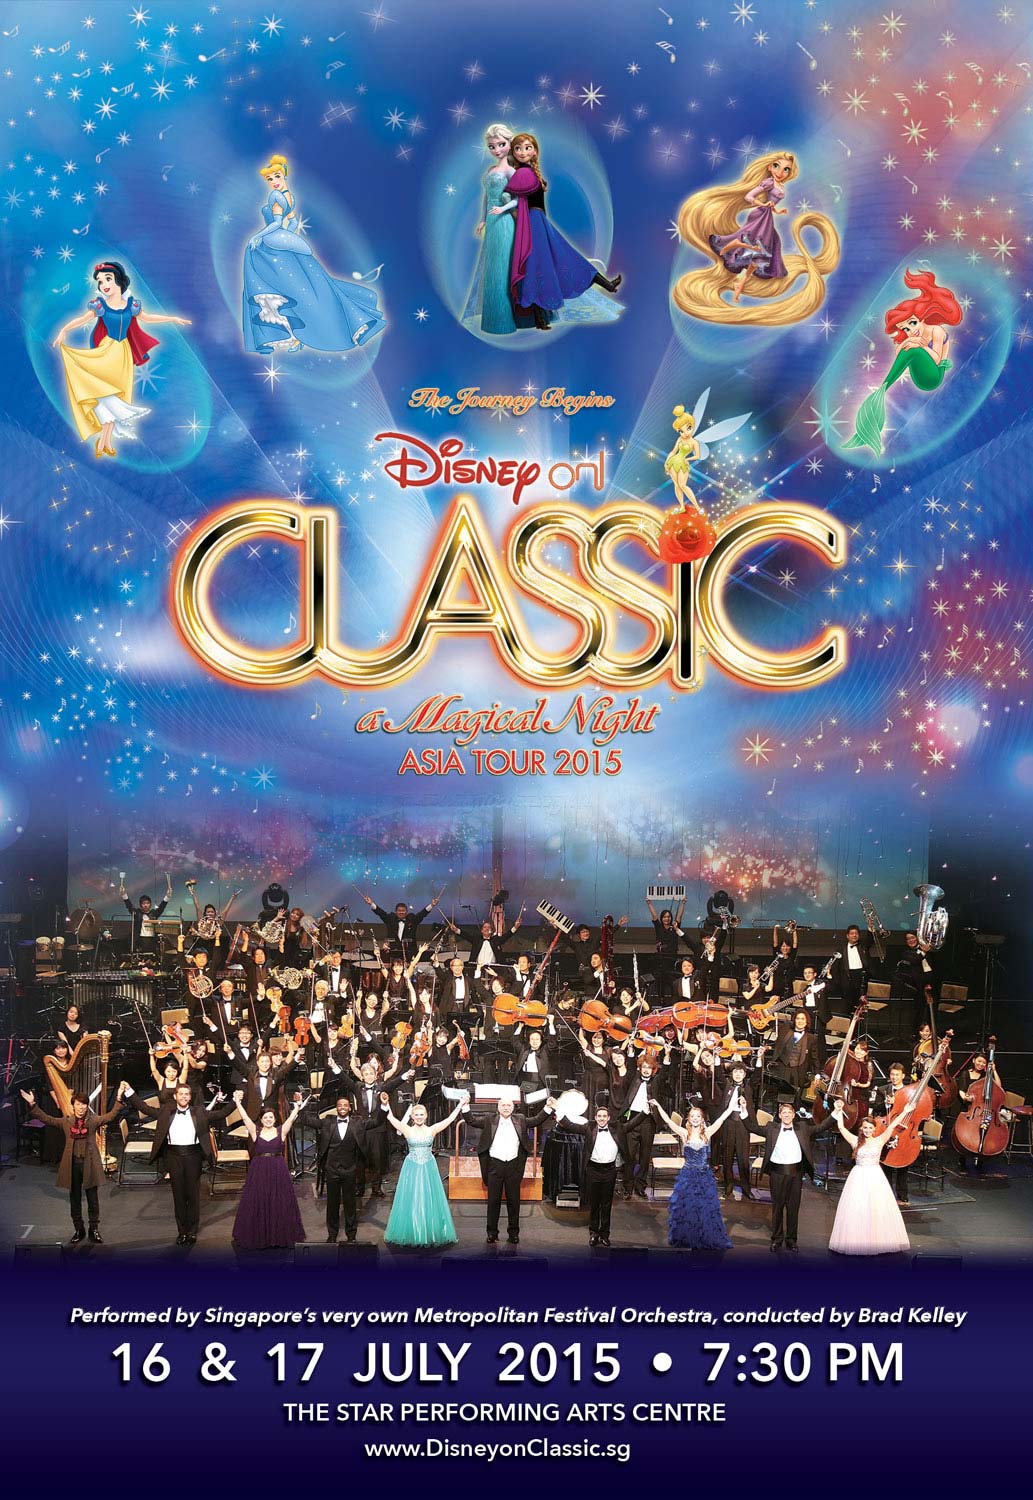 Disney-on-Classic---A-Magical-Night-Official-Poster_2-(credit-to-Metropolitan-Festival-Orchestra)